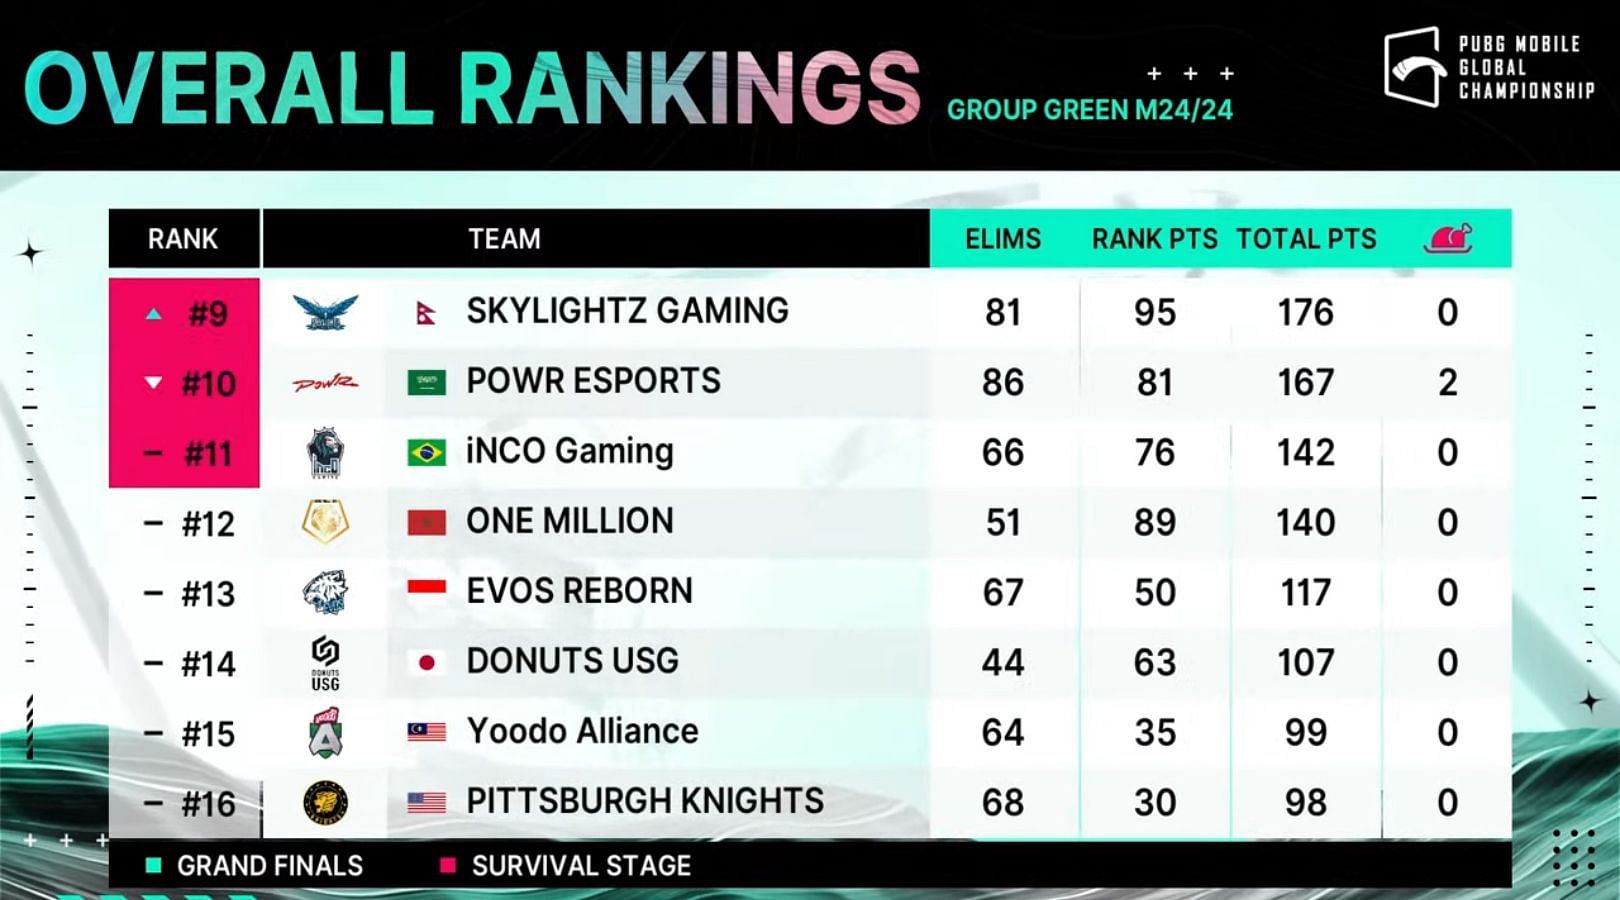 Overall rankings of PMGC Group Green (Image via PUBG Mobile)